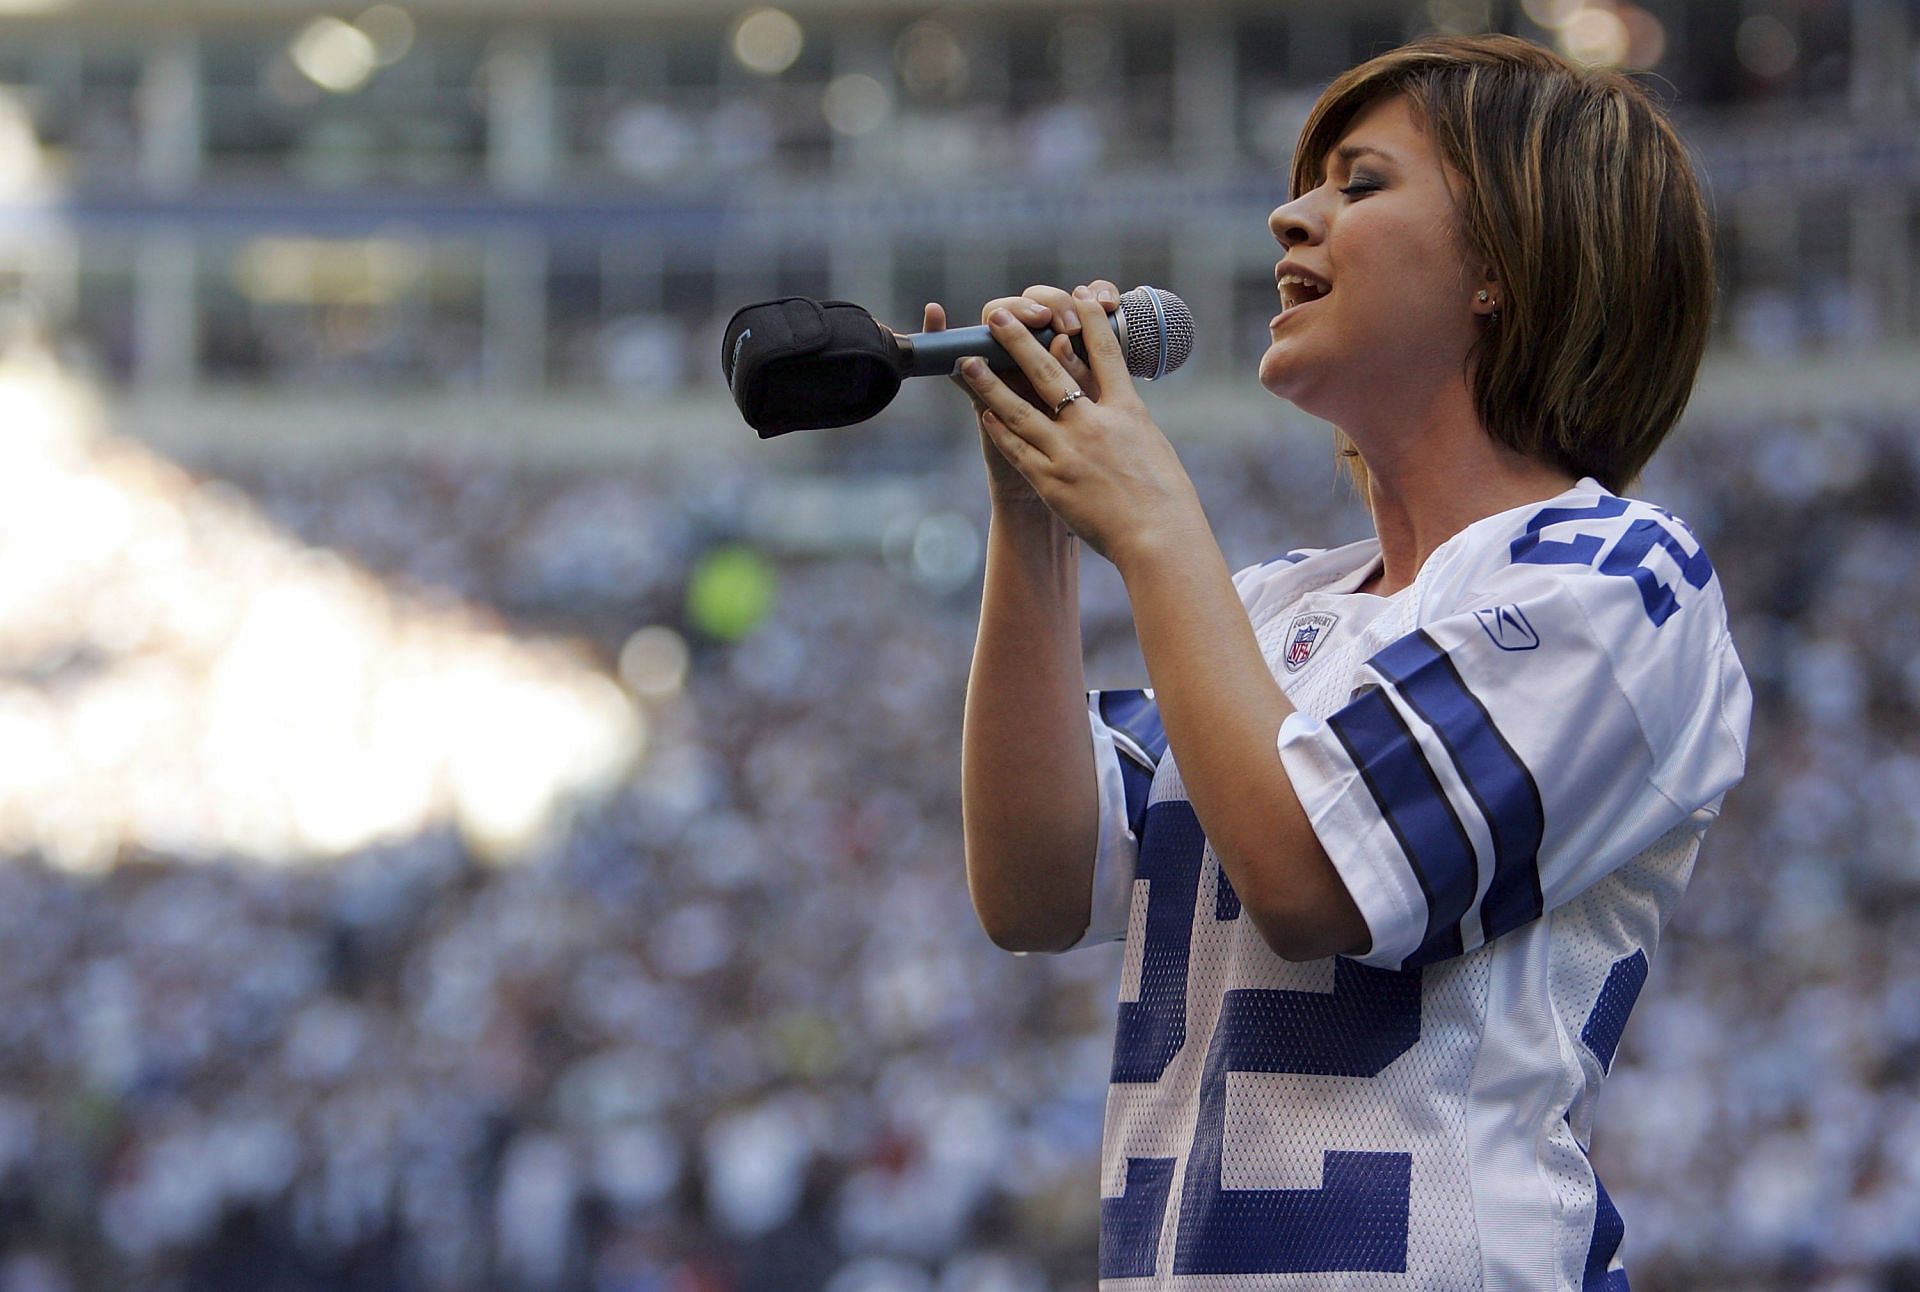 Kelly Clarkson sings the National Anthem before a Dallas Cowboys game.